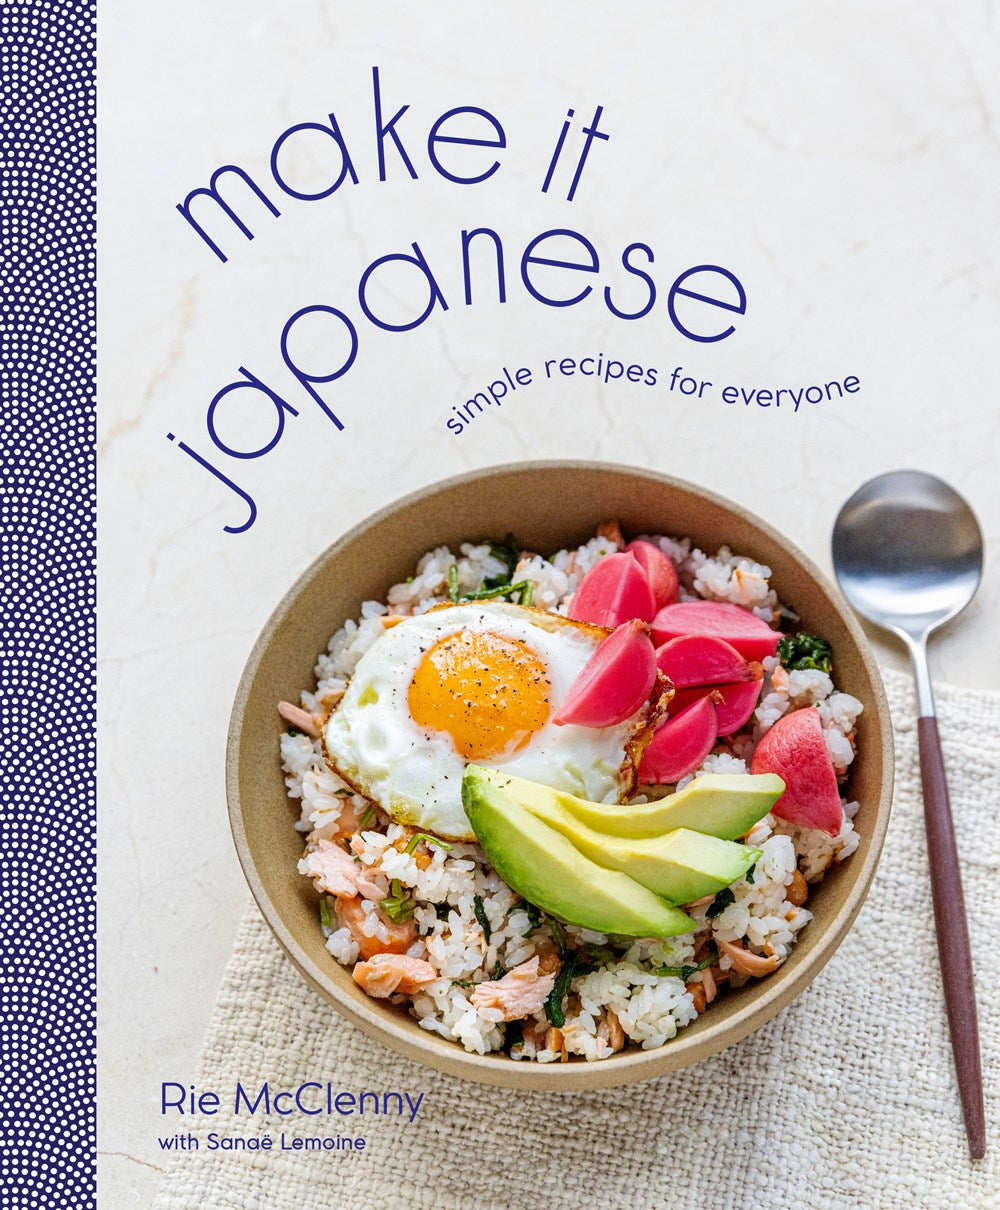 Make It Japanese: Simple Recipes for Everyone by Rie McClenny with Sanae Lemoine (10/24/23)